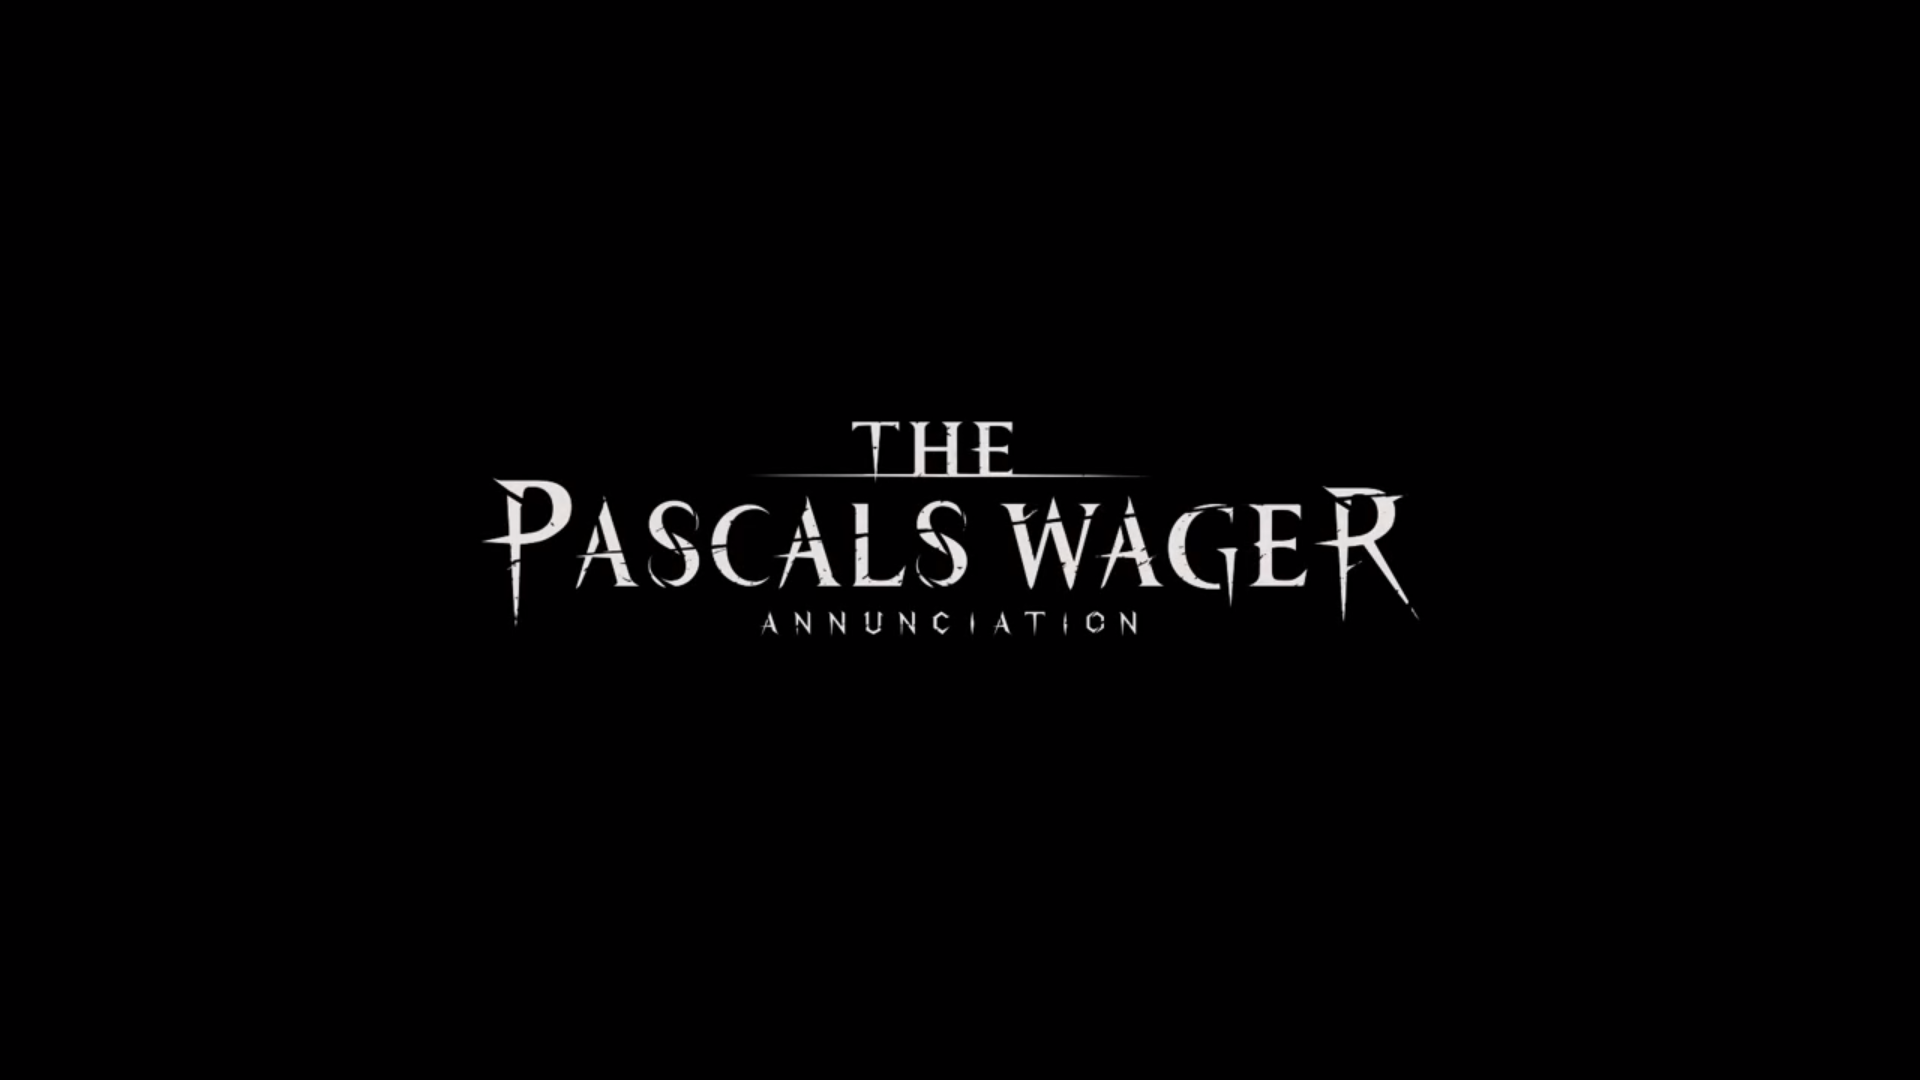 Pascals wager встроенный кэш на андроид. Pascal's Wager. Pascal's Wager: Definitive Edition. Pascal’s Wager Терренс. The Pascal’s Wager: Annunciation.